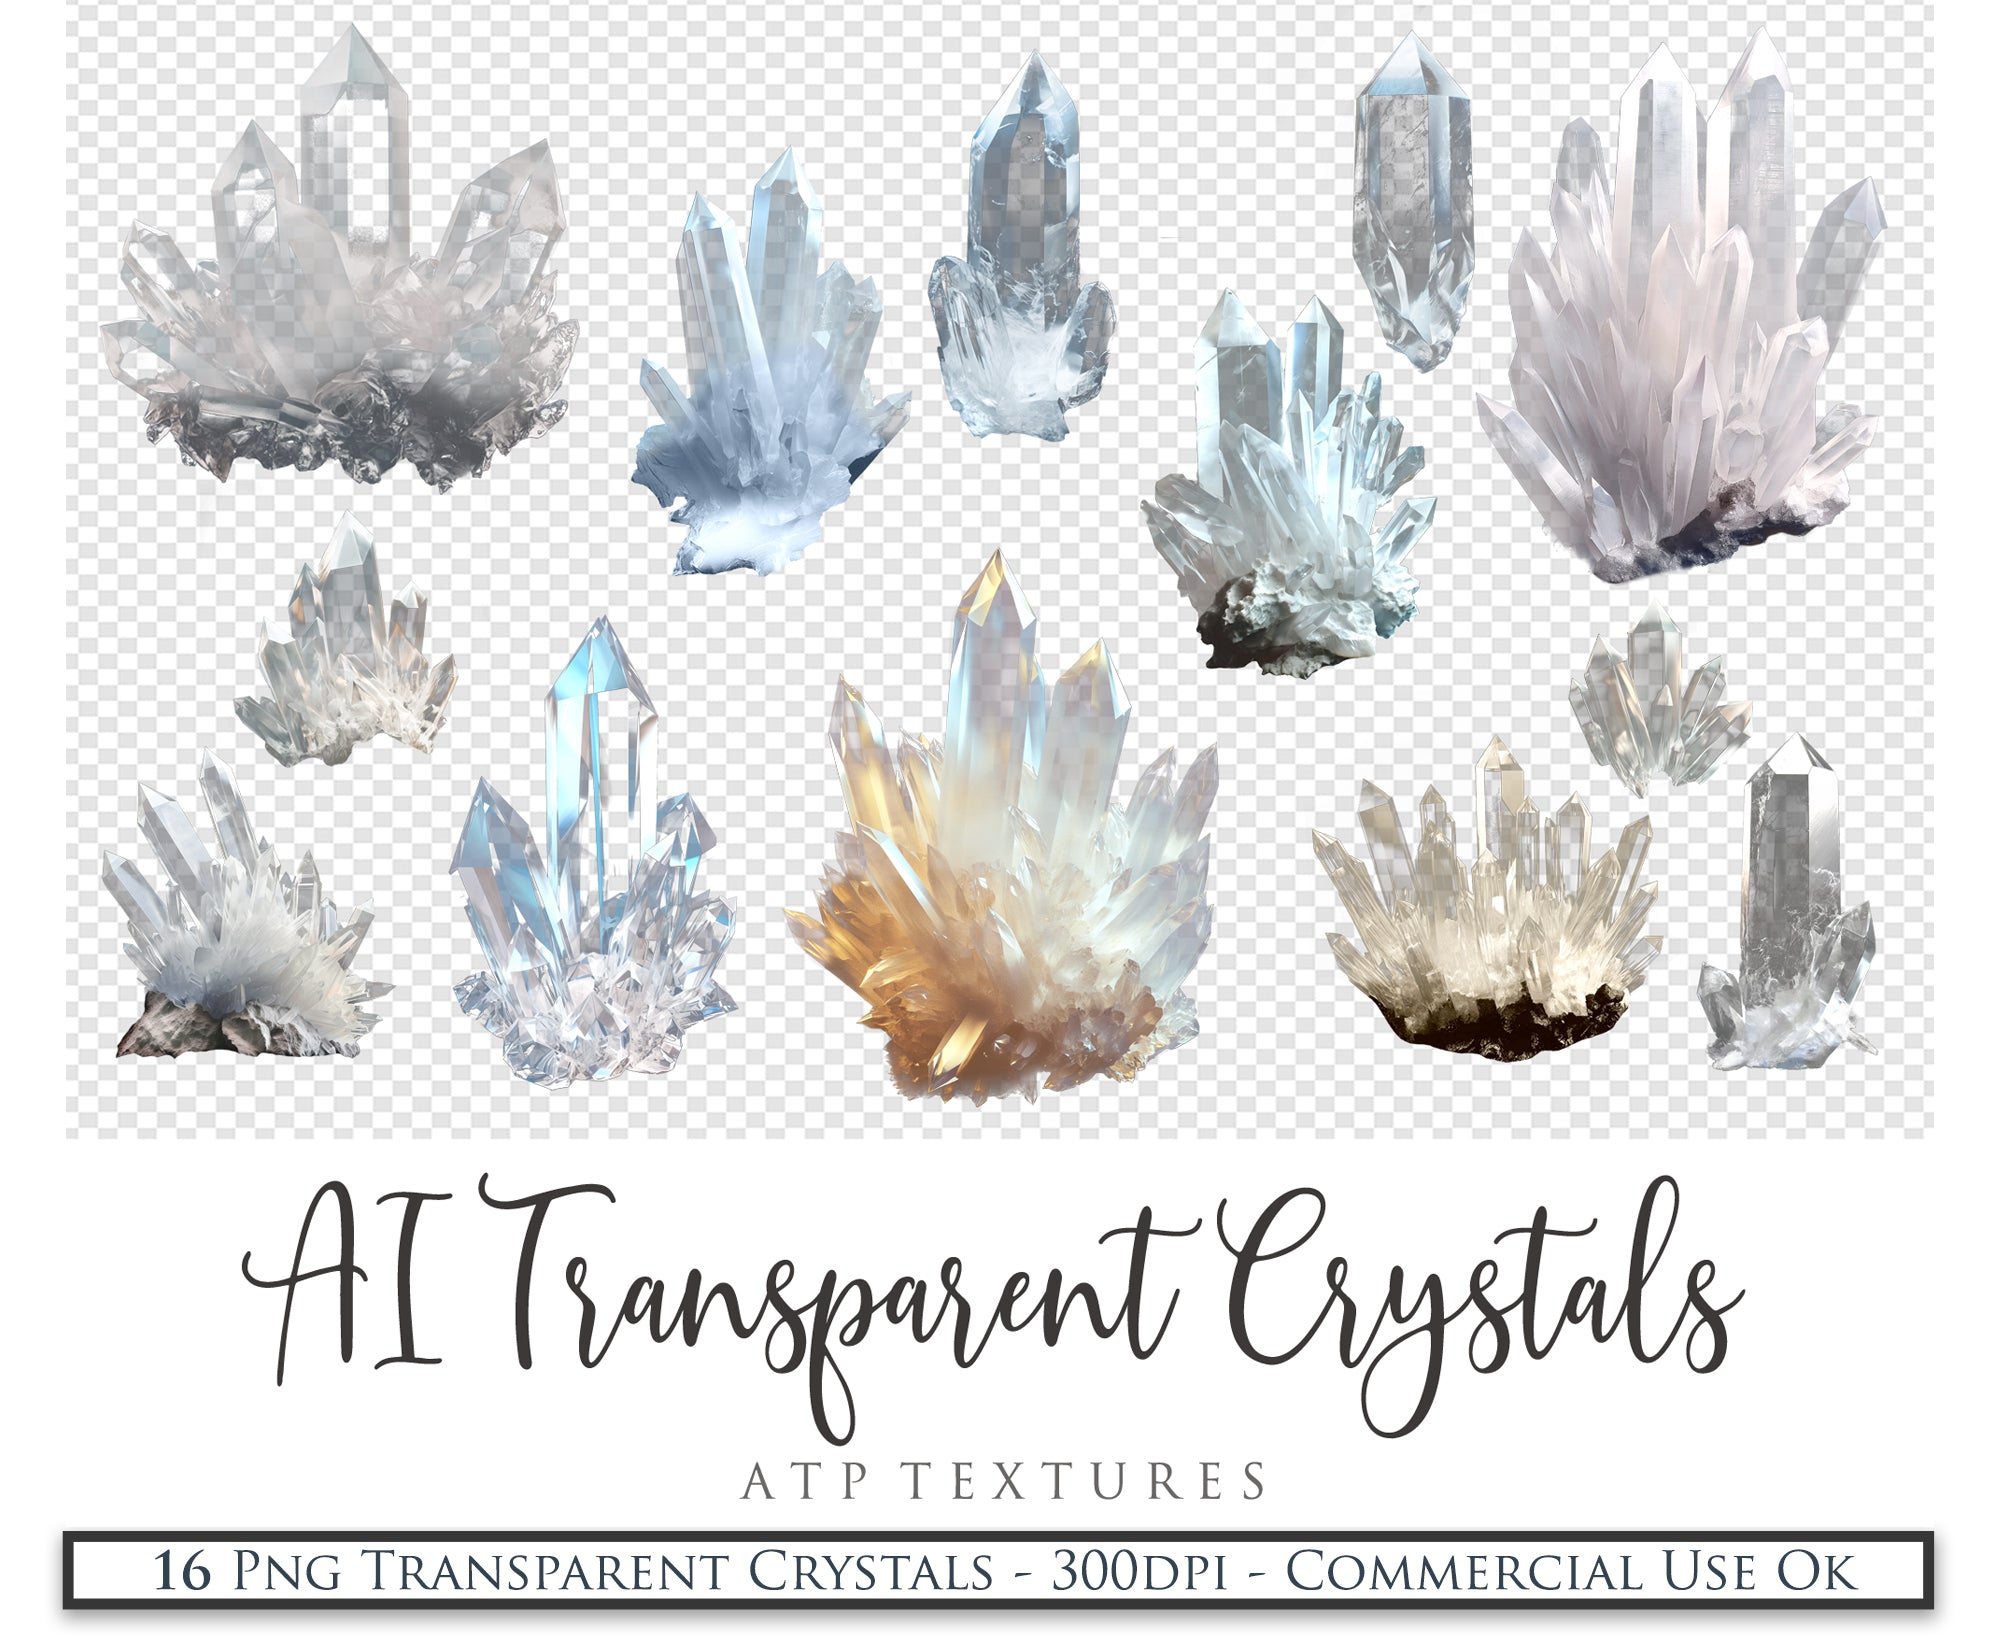 Quartz Rock Crystal overlays for clipart or Photography editing. Transparent clear see through digital files. High resolution graphic Assets for design. by ATP textures.